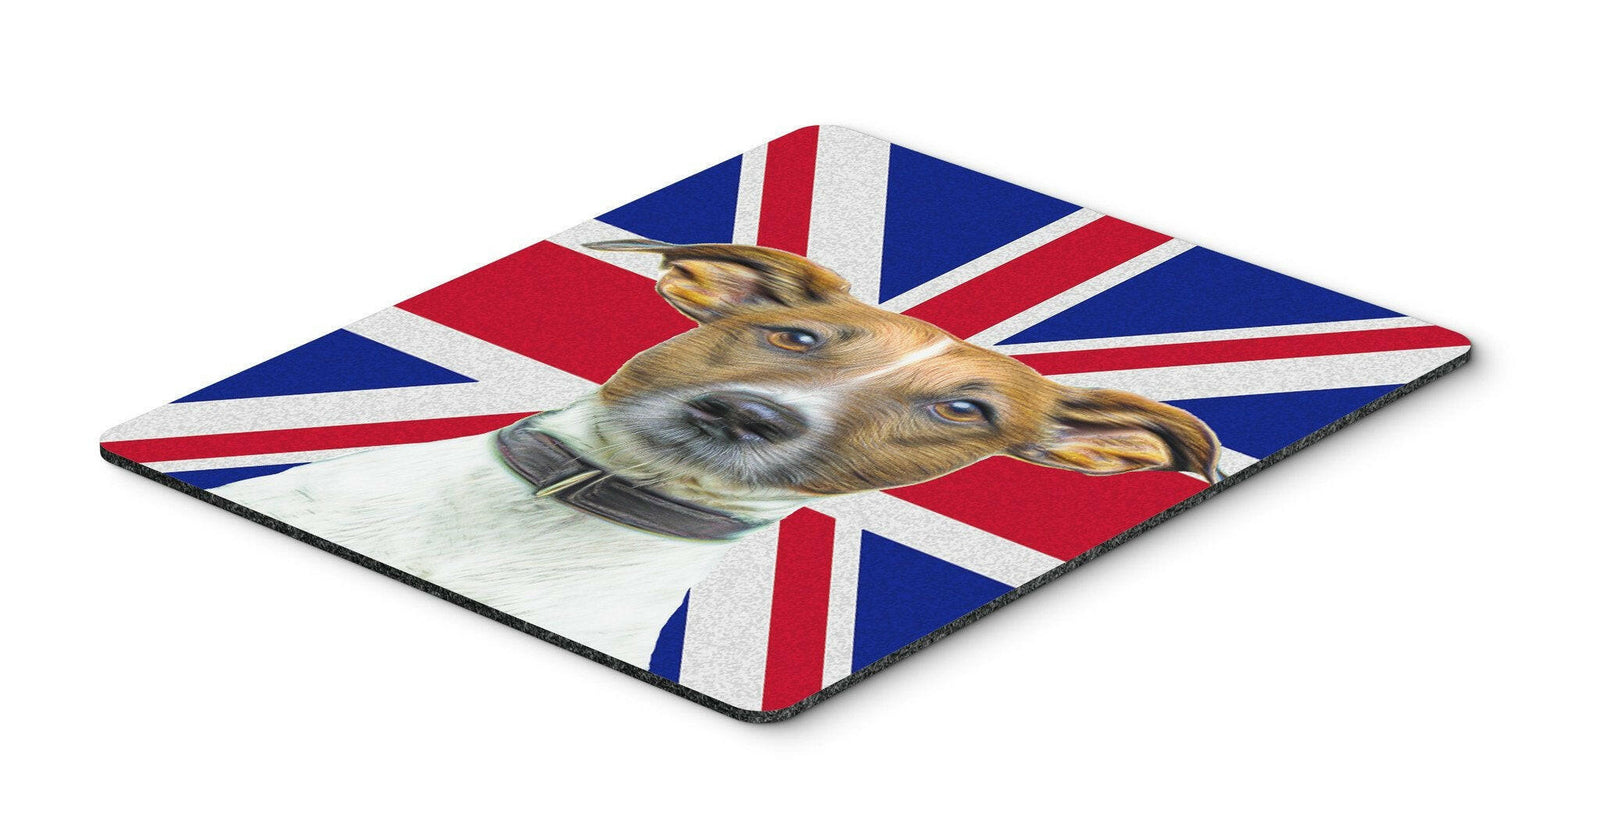 Jack Russell Terrier with English Union Jack British Flag Mouse Pad, Hot Pad or Trivet KJ1162MP by Caroline's Treasures